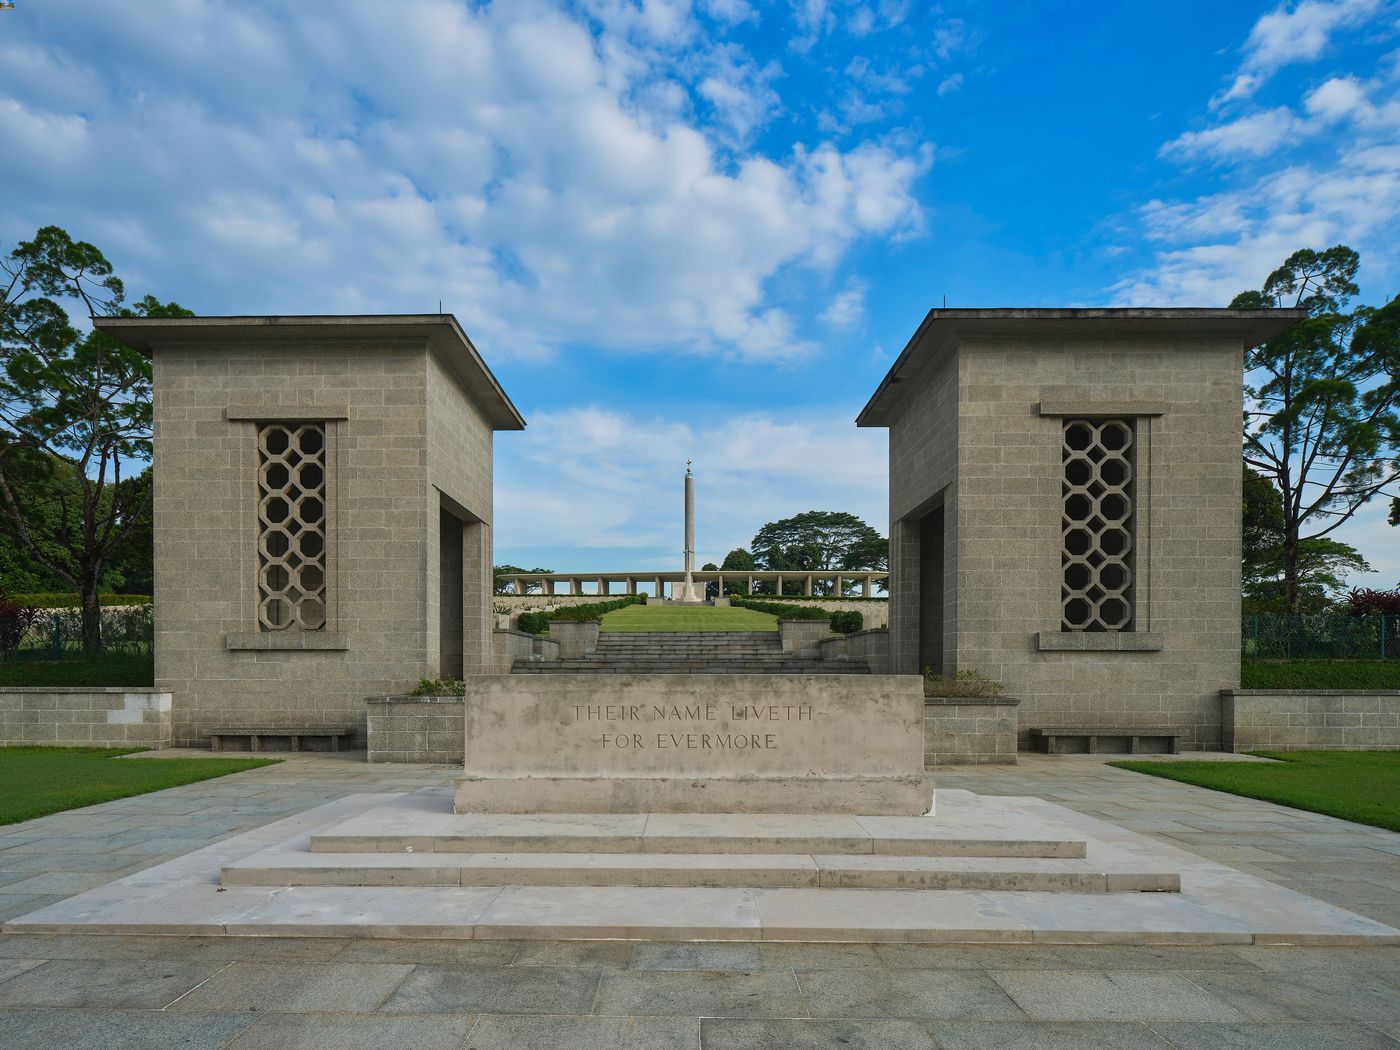 Two cemeteries of national significance are housed at this site: Kranji War Cemetery is a burial site for soldiers who died defending Singapore and Malaya during World War II, and Kranji State Cemetery is a burial site for two former presidents of Singapore.